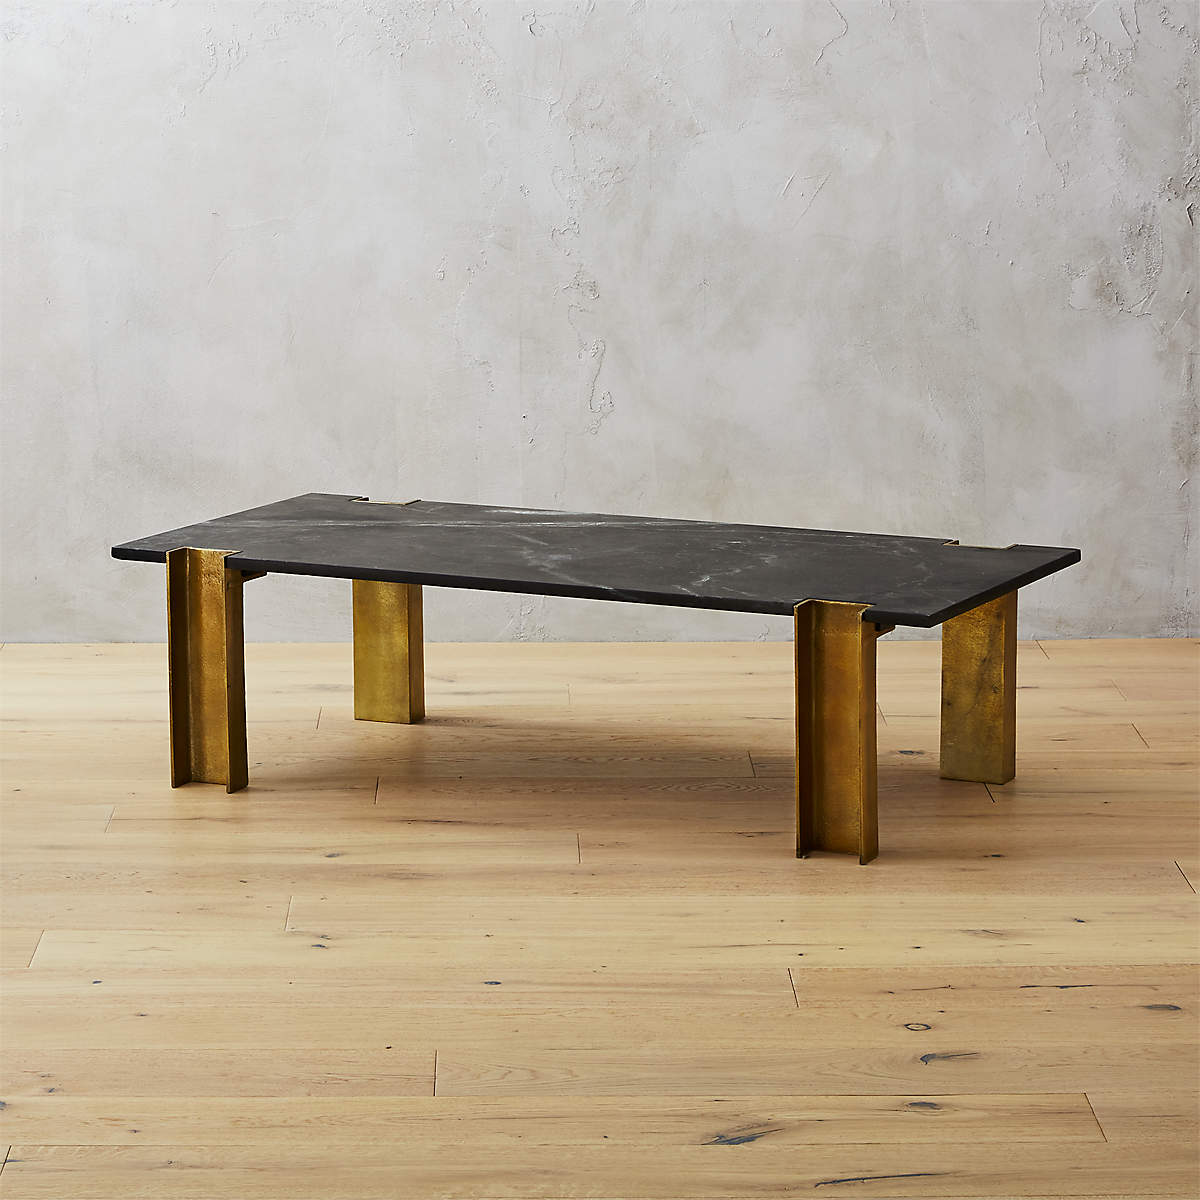 Alcide Rectangular Marble Coffee Table- image 1 of 9 (Open Larger View)